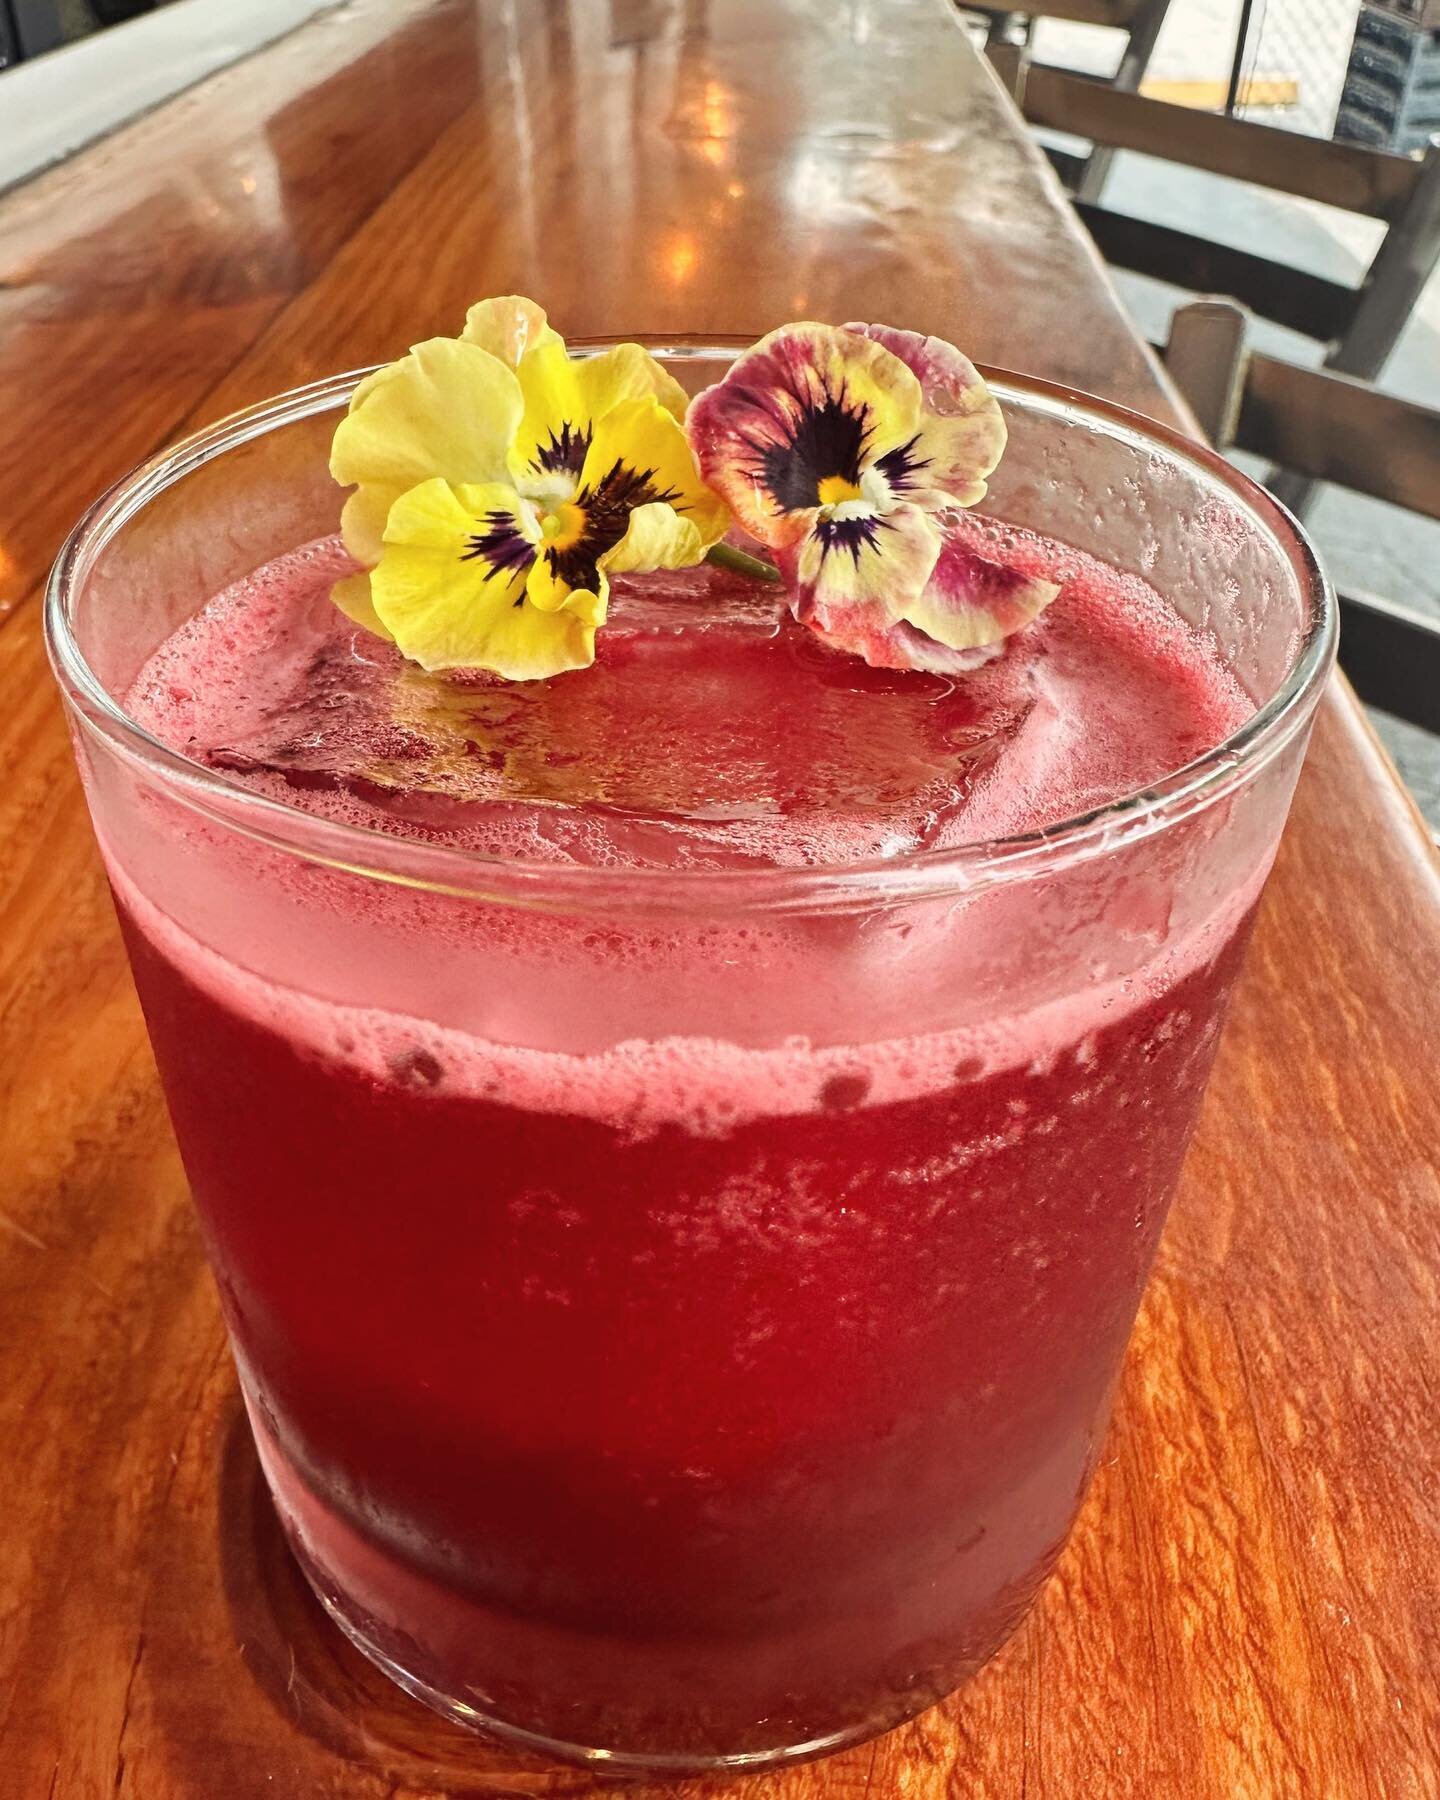 SoMi Sorrel - DRINK OF THE WEEK - Winter Island Vibes coming from our bar. Don&rsquo;t miss out! Only this weekend✨✨✨@whiskgourmet #southmiami #miamicocktails #craftcocktails #rum #plantationrum #islandvibes